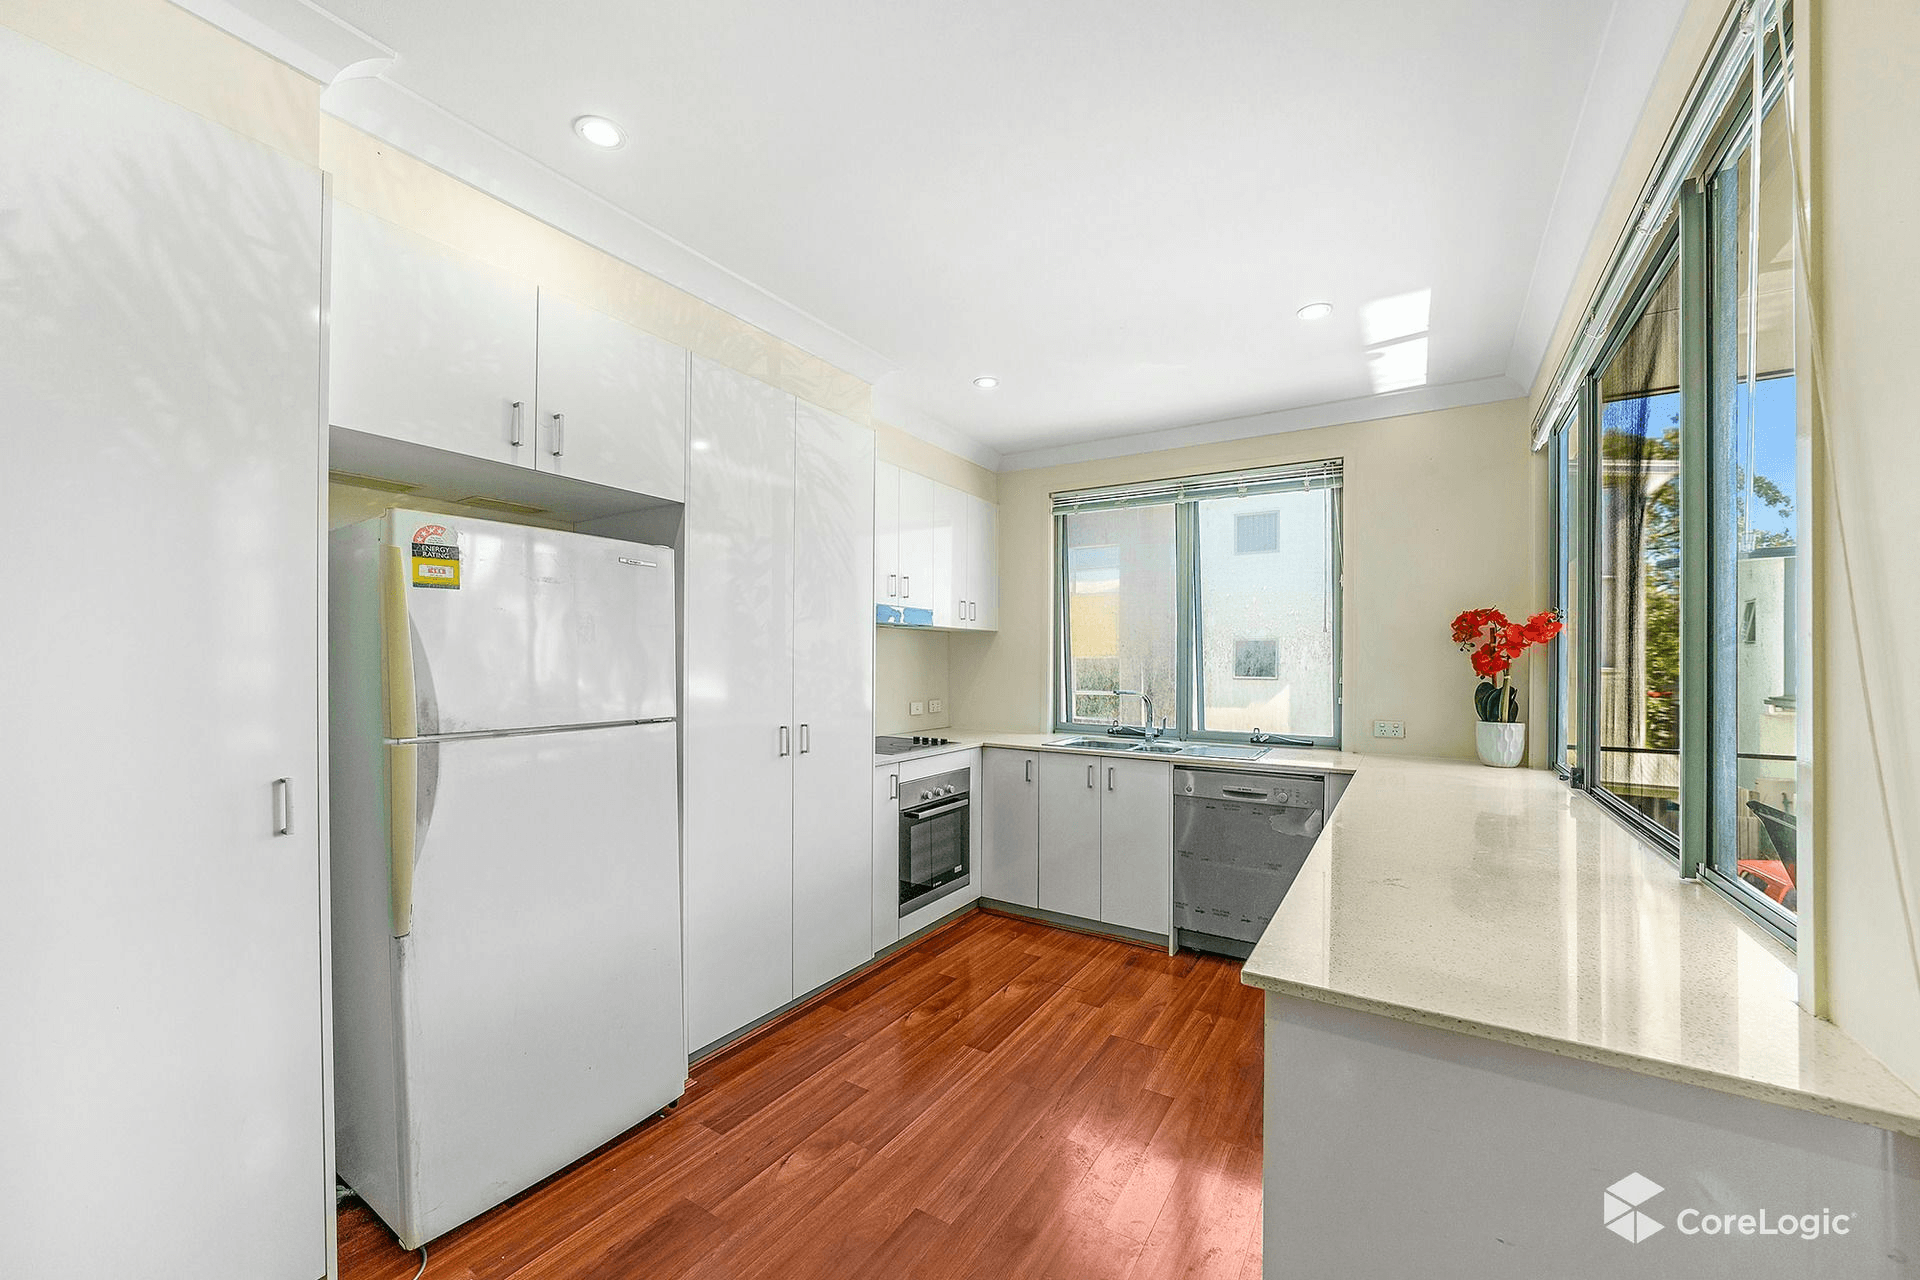 Unit 38/17 Great Southern Dr, Robina, QLD 4226